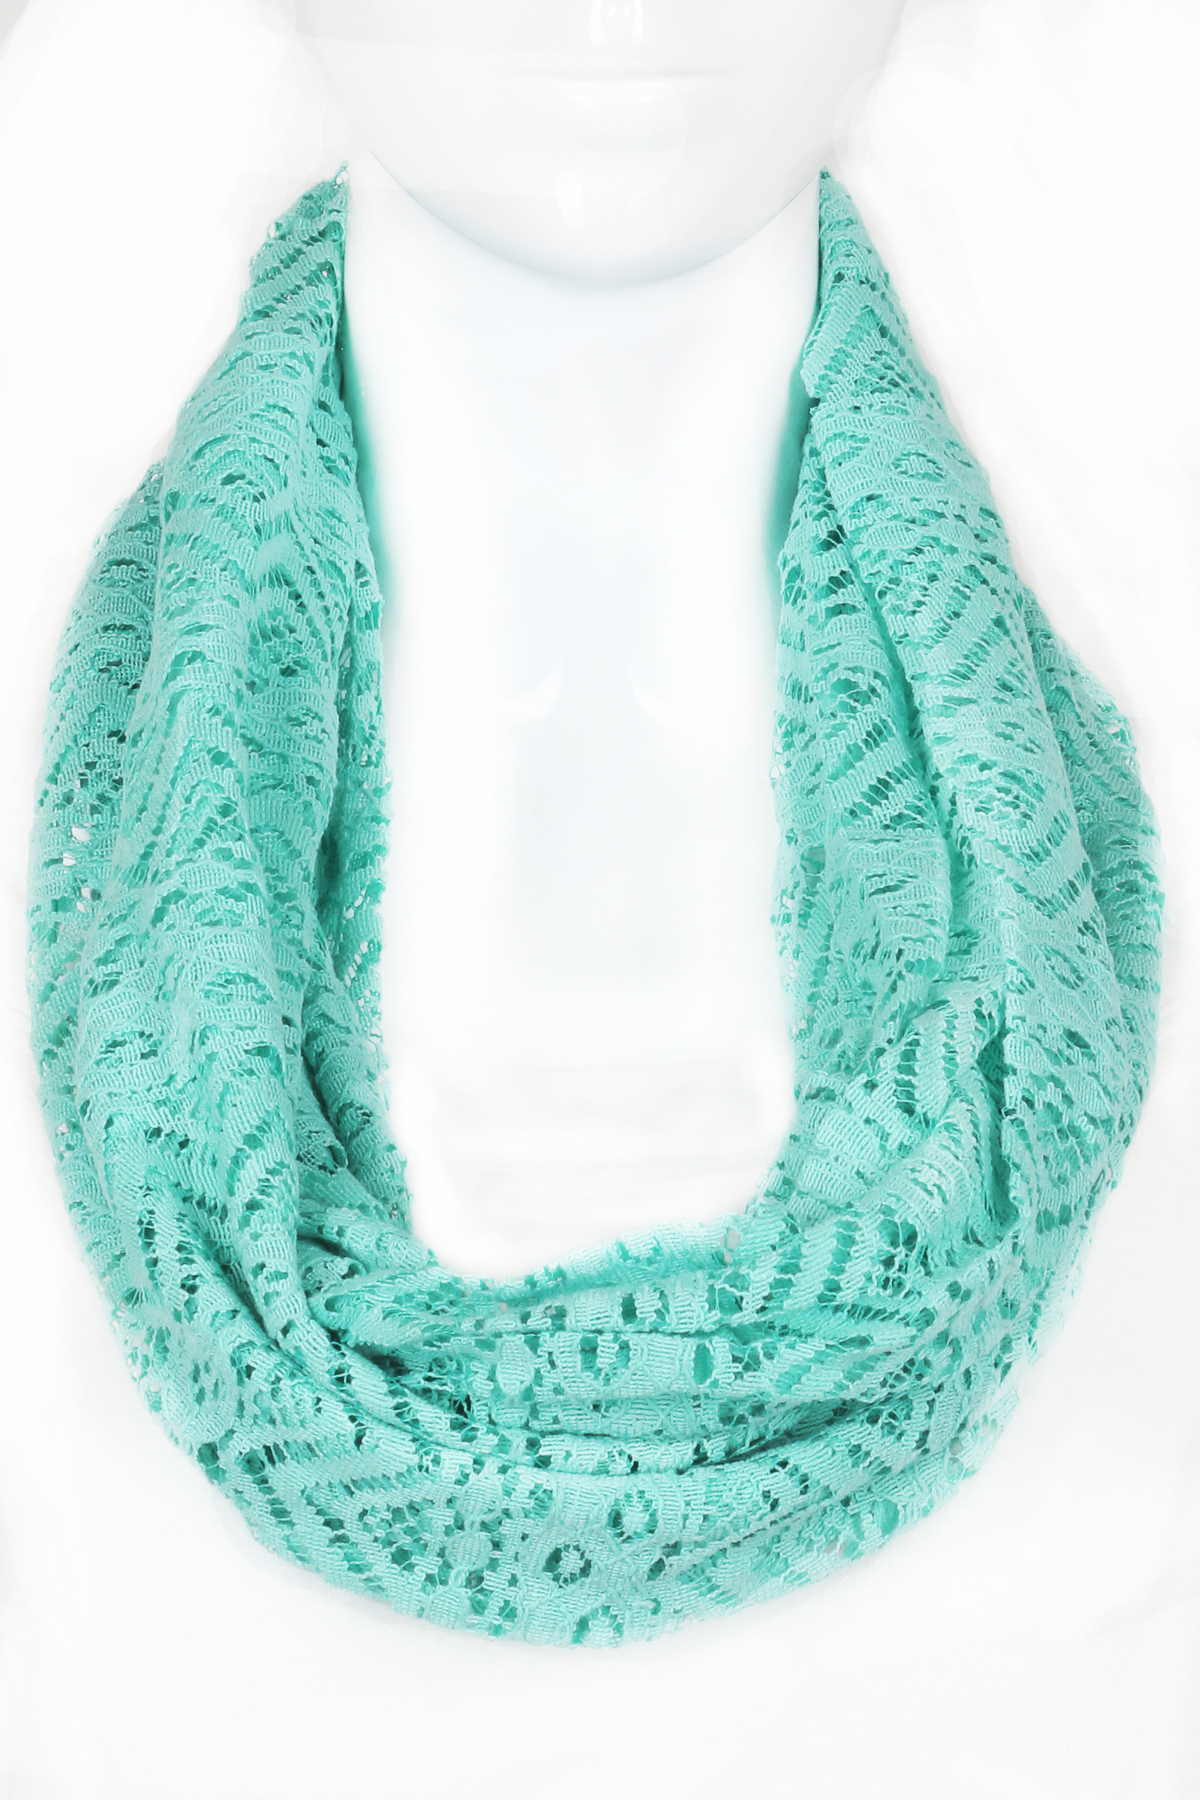 Knitted Lace Infinity Scarf Scarves